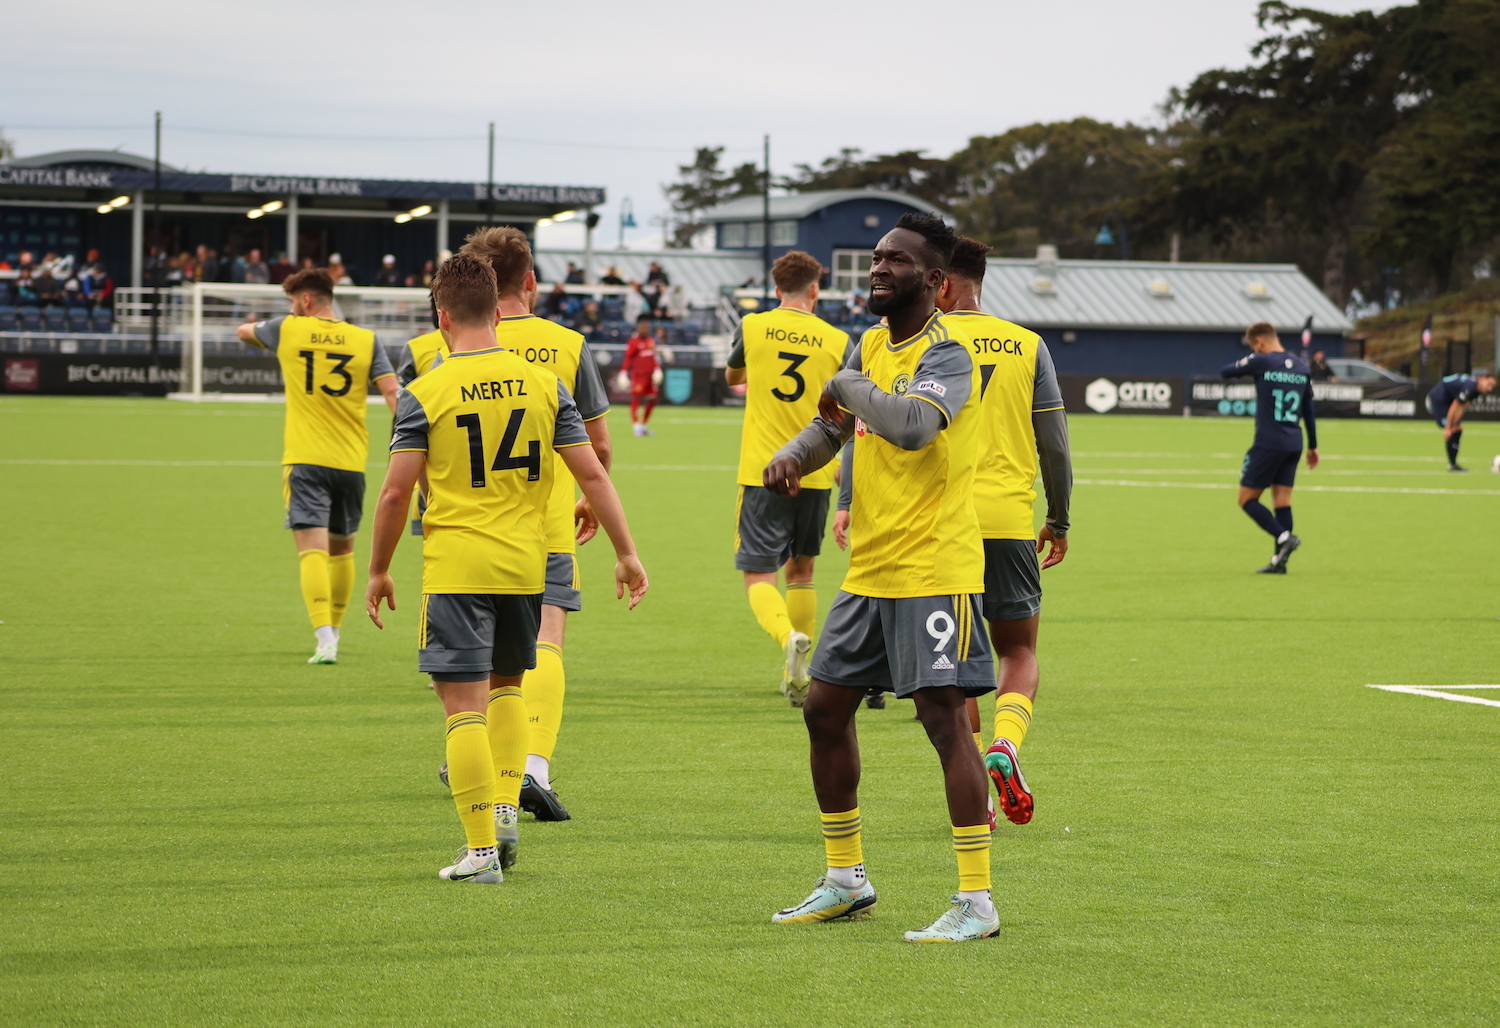 Albert Dikwa celebrates after scoring his first goal in the Riverhounds' 2-2 draw at Monterey Bay FC on May 5, 2023 in Seaside, Calif.